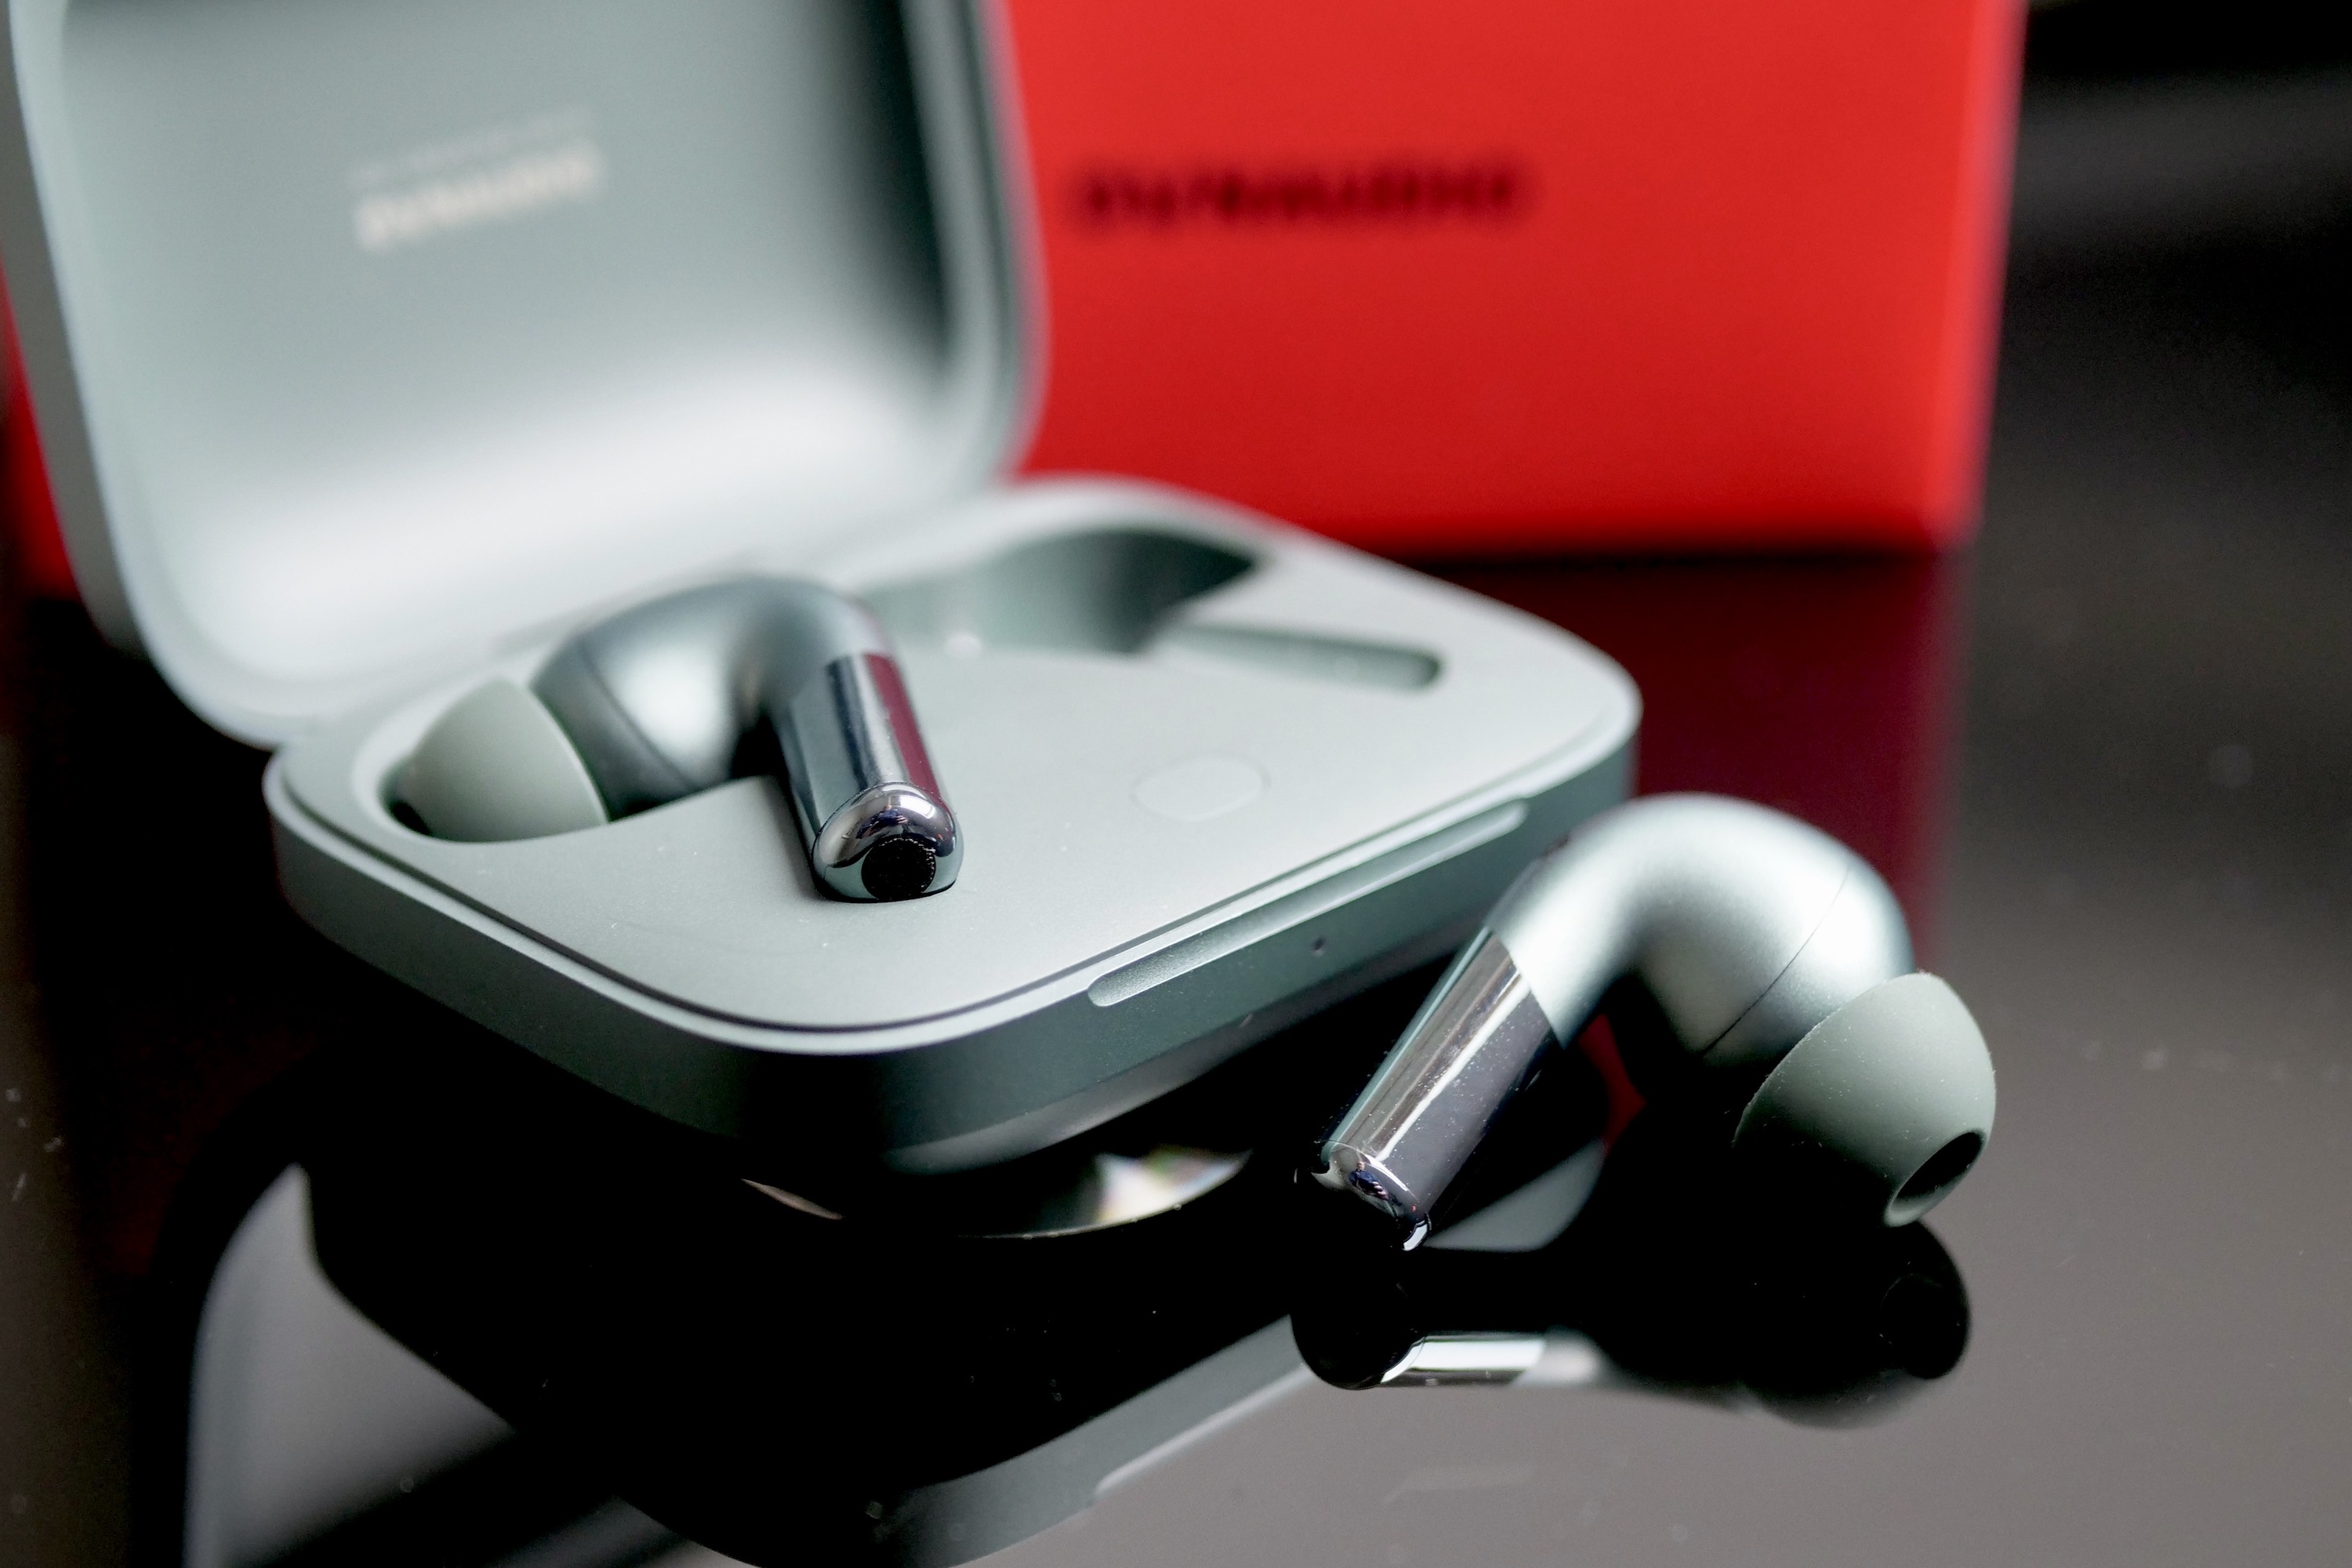 OnePlus Buds Pro 2 earphones next to the open case.